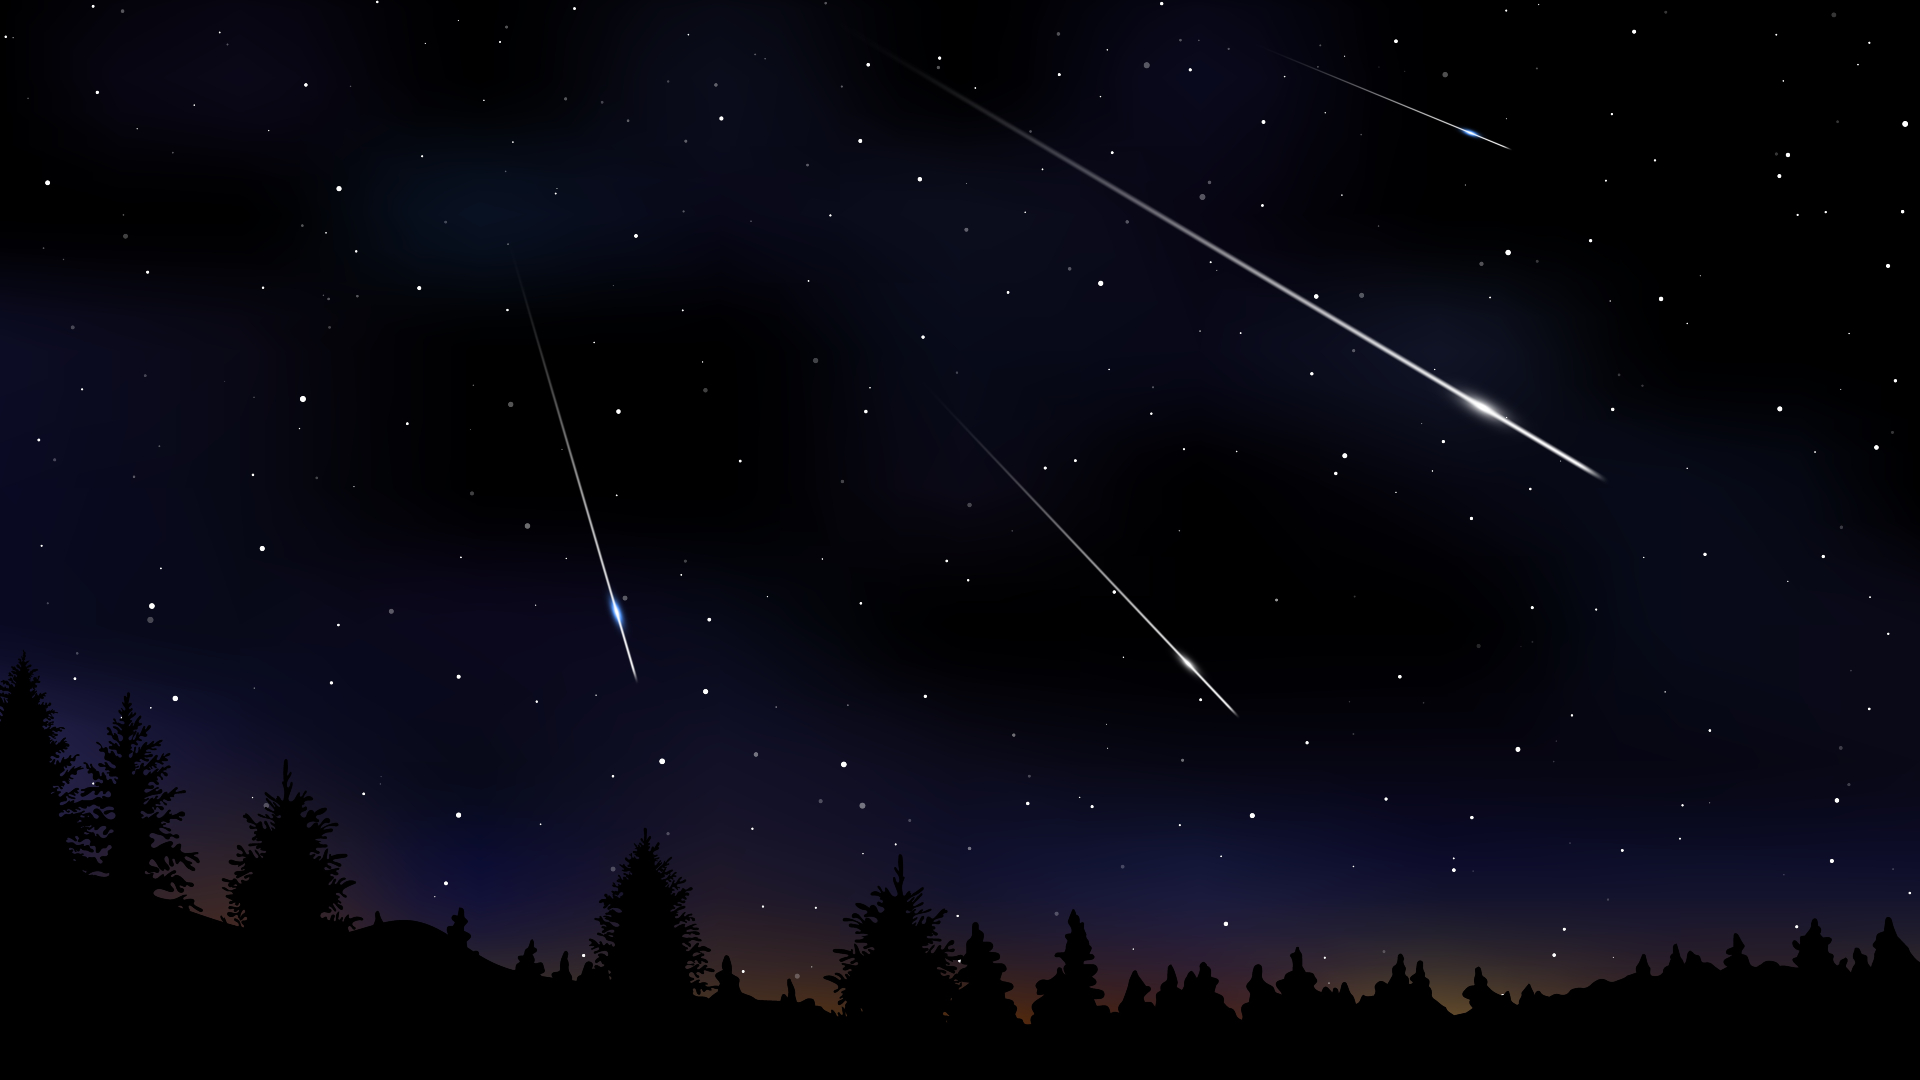 A meteor shower outburst from